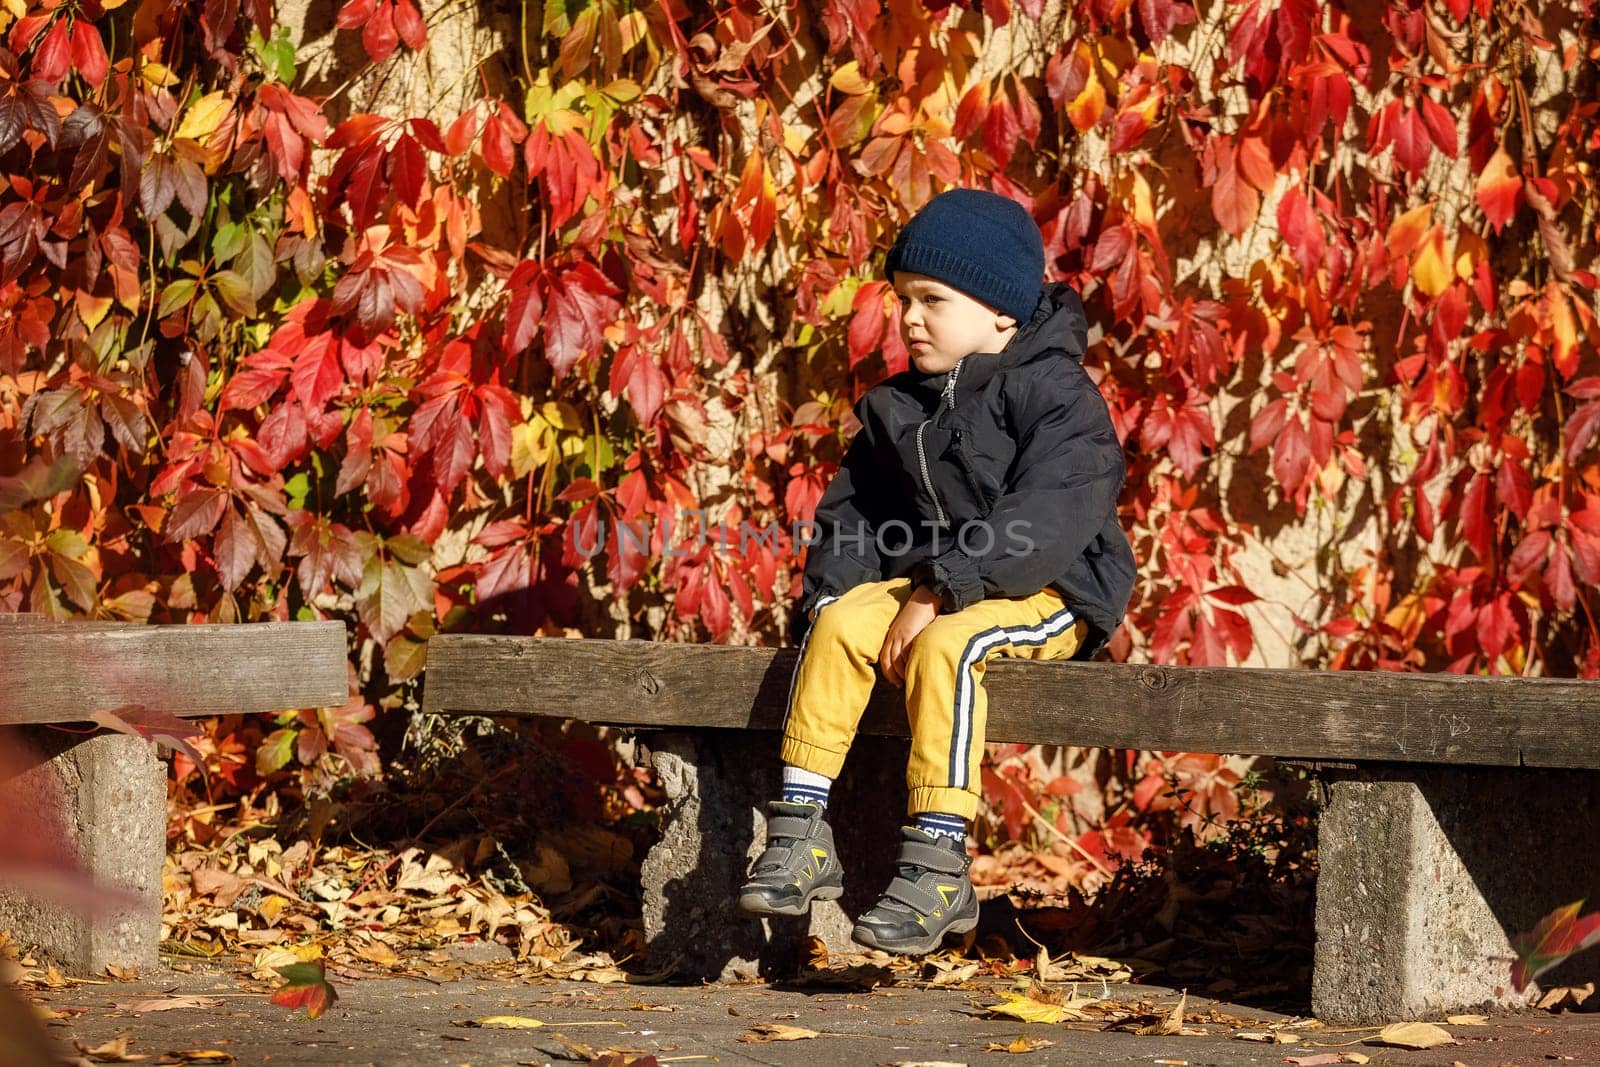 Lonely cute boy sitting on a bench against a background of bright red autumn leaves. by Lincikas